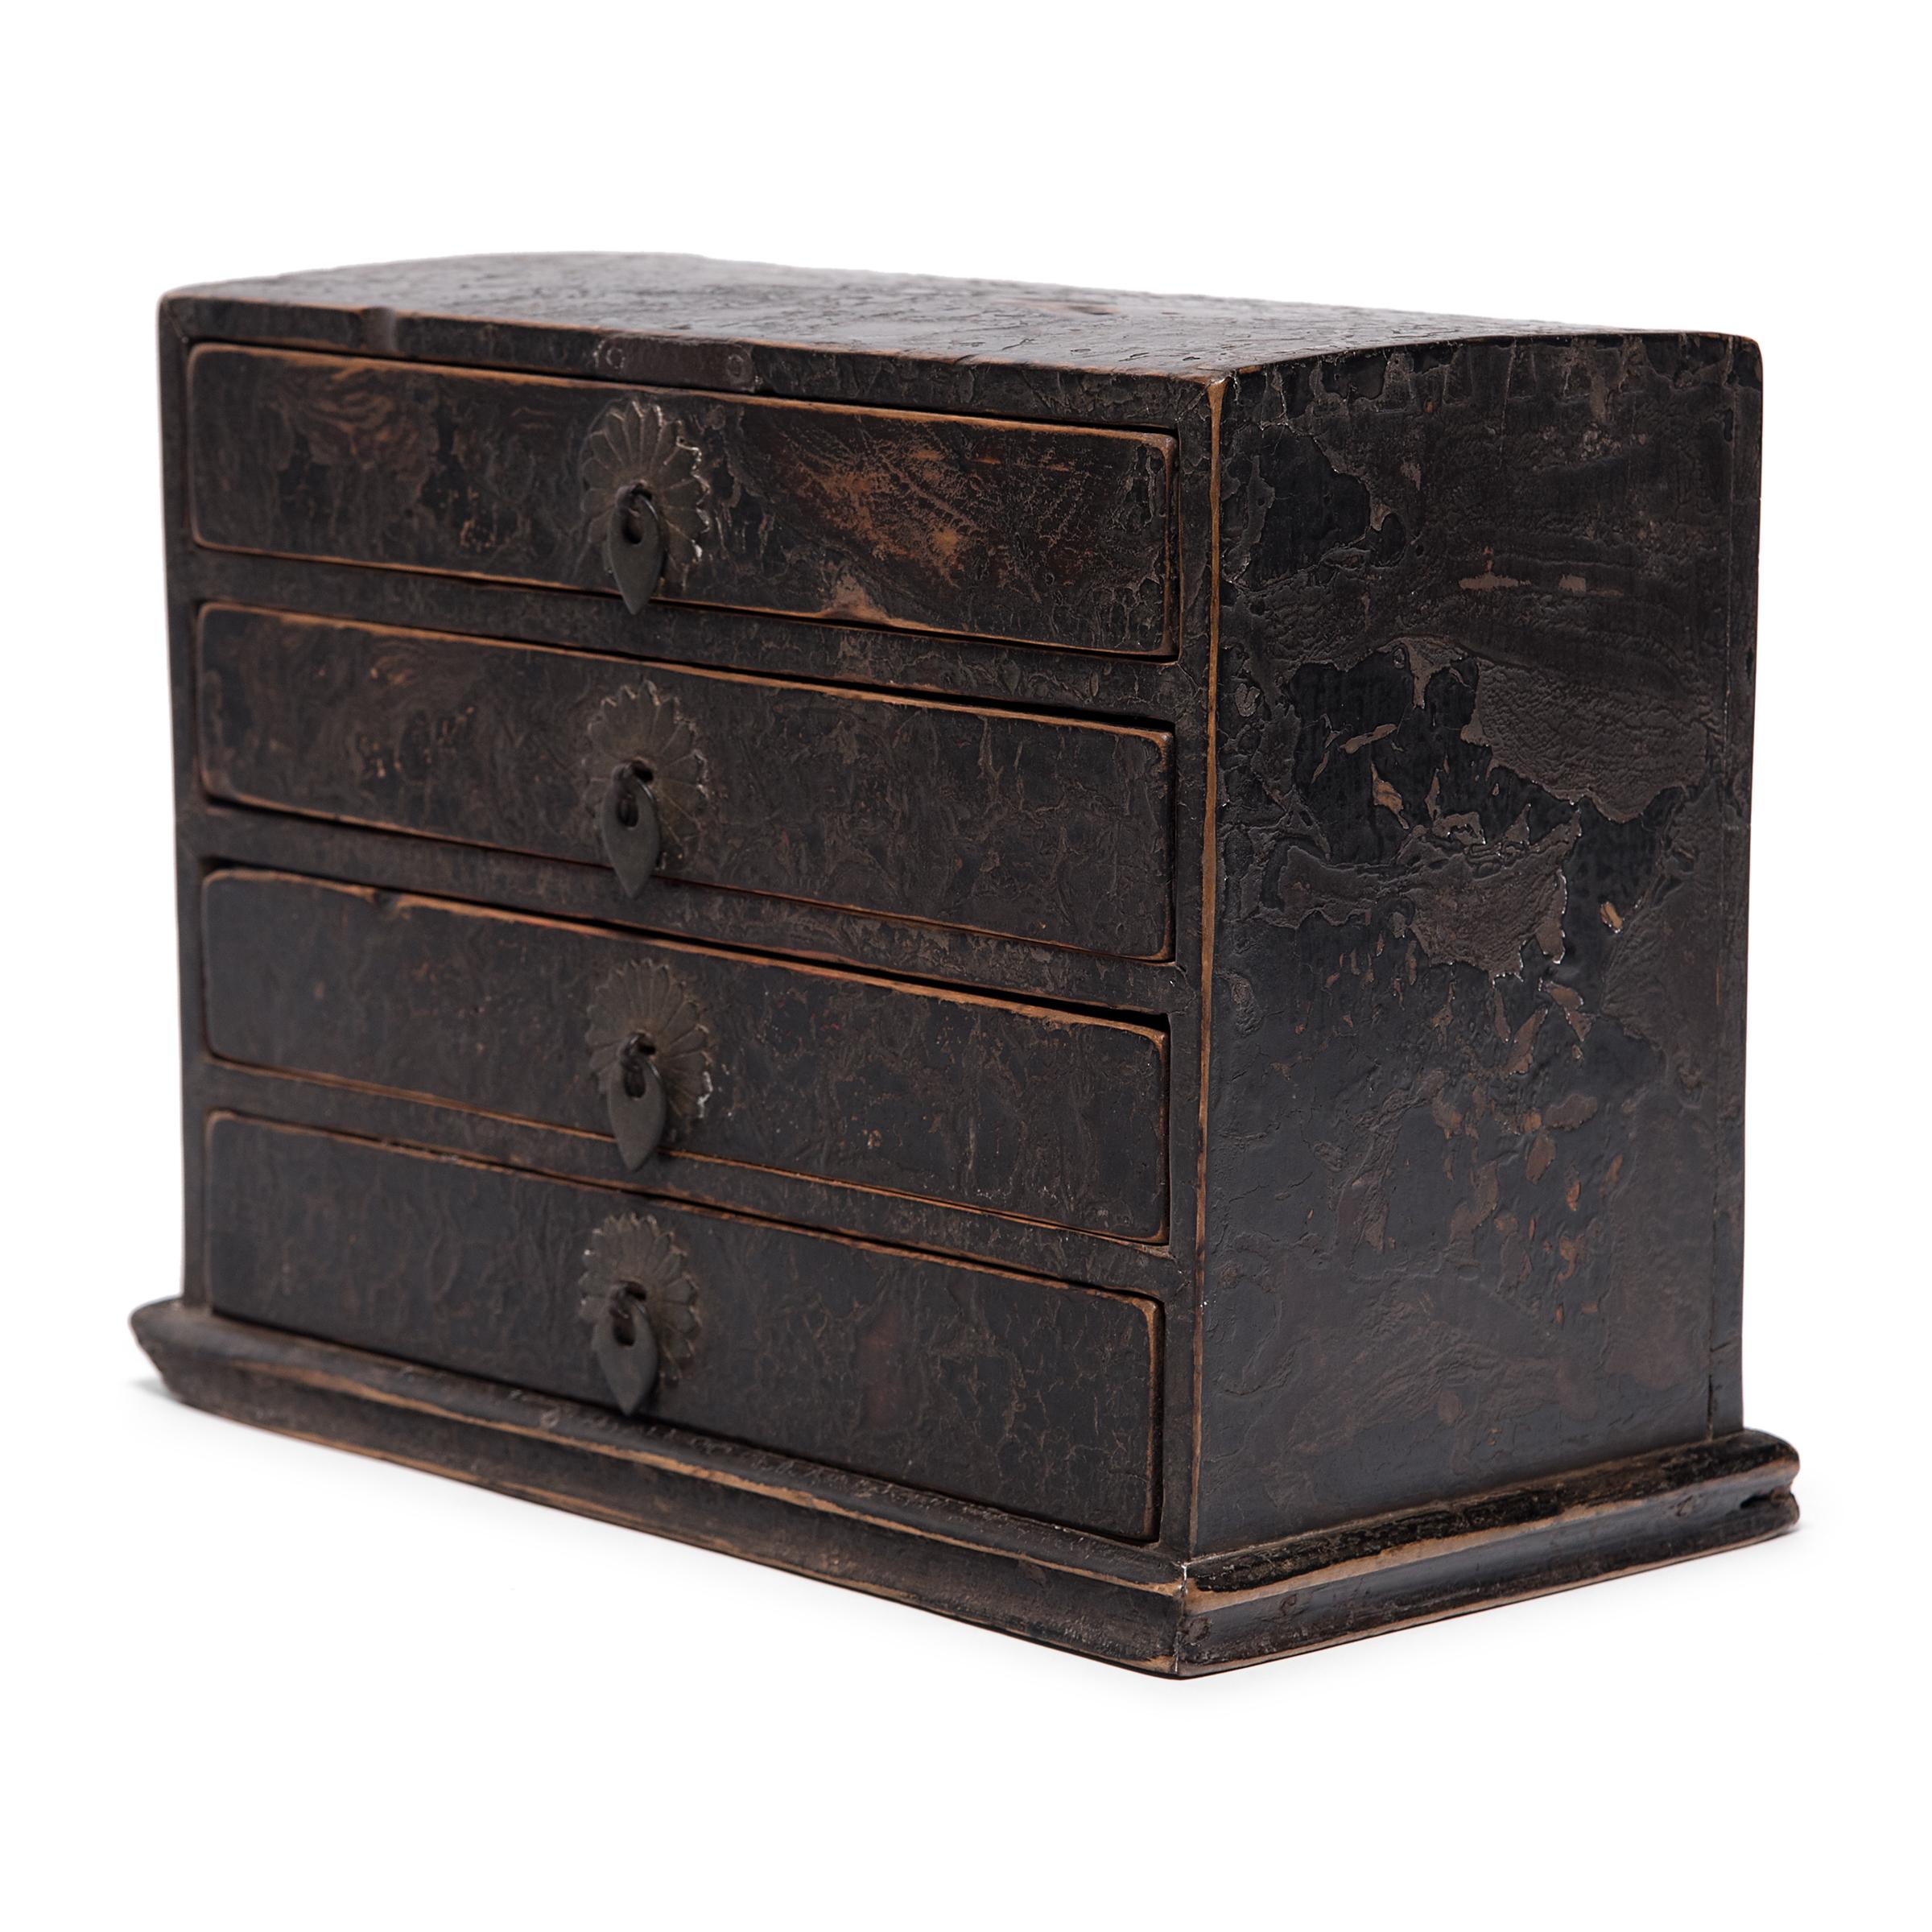 Lacquered Chinese Crackled Lacquer Autumn Altar Box, circa 1850 For Sale